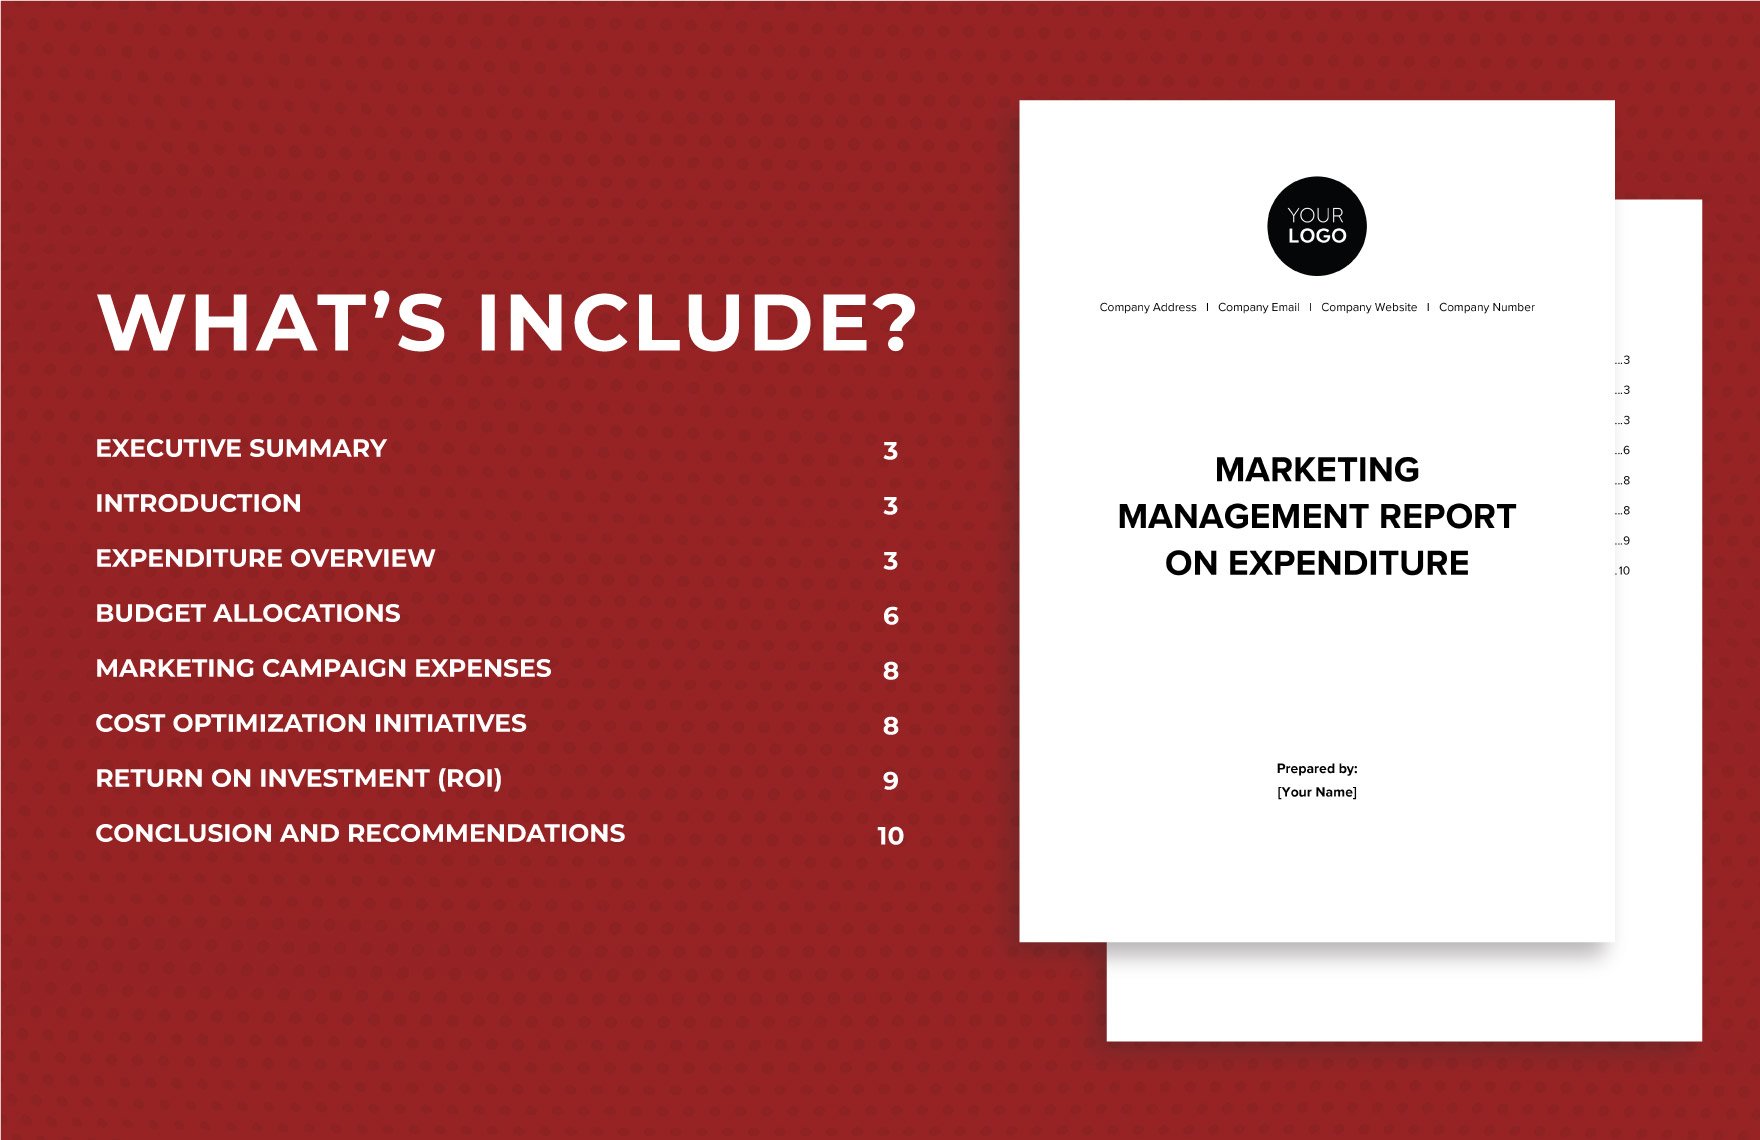 Marketing Management Report on Expenditure Template